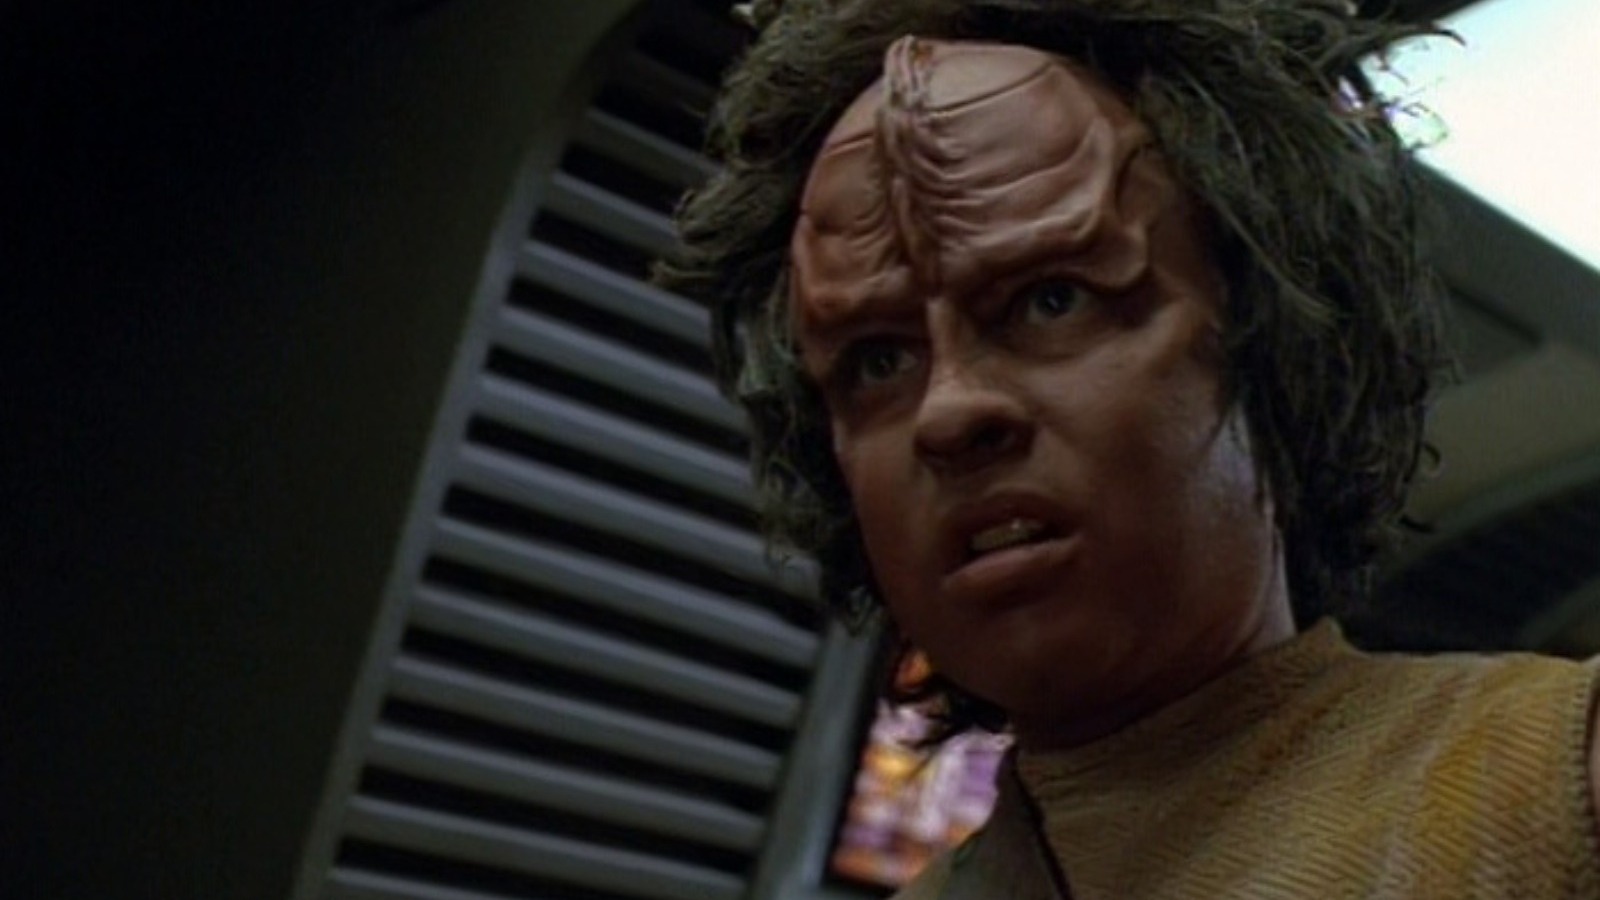 An unfortunate crippled DS9 cameo in Star Trek: Voyager's Initiations episode